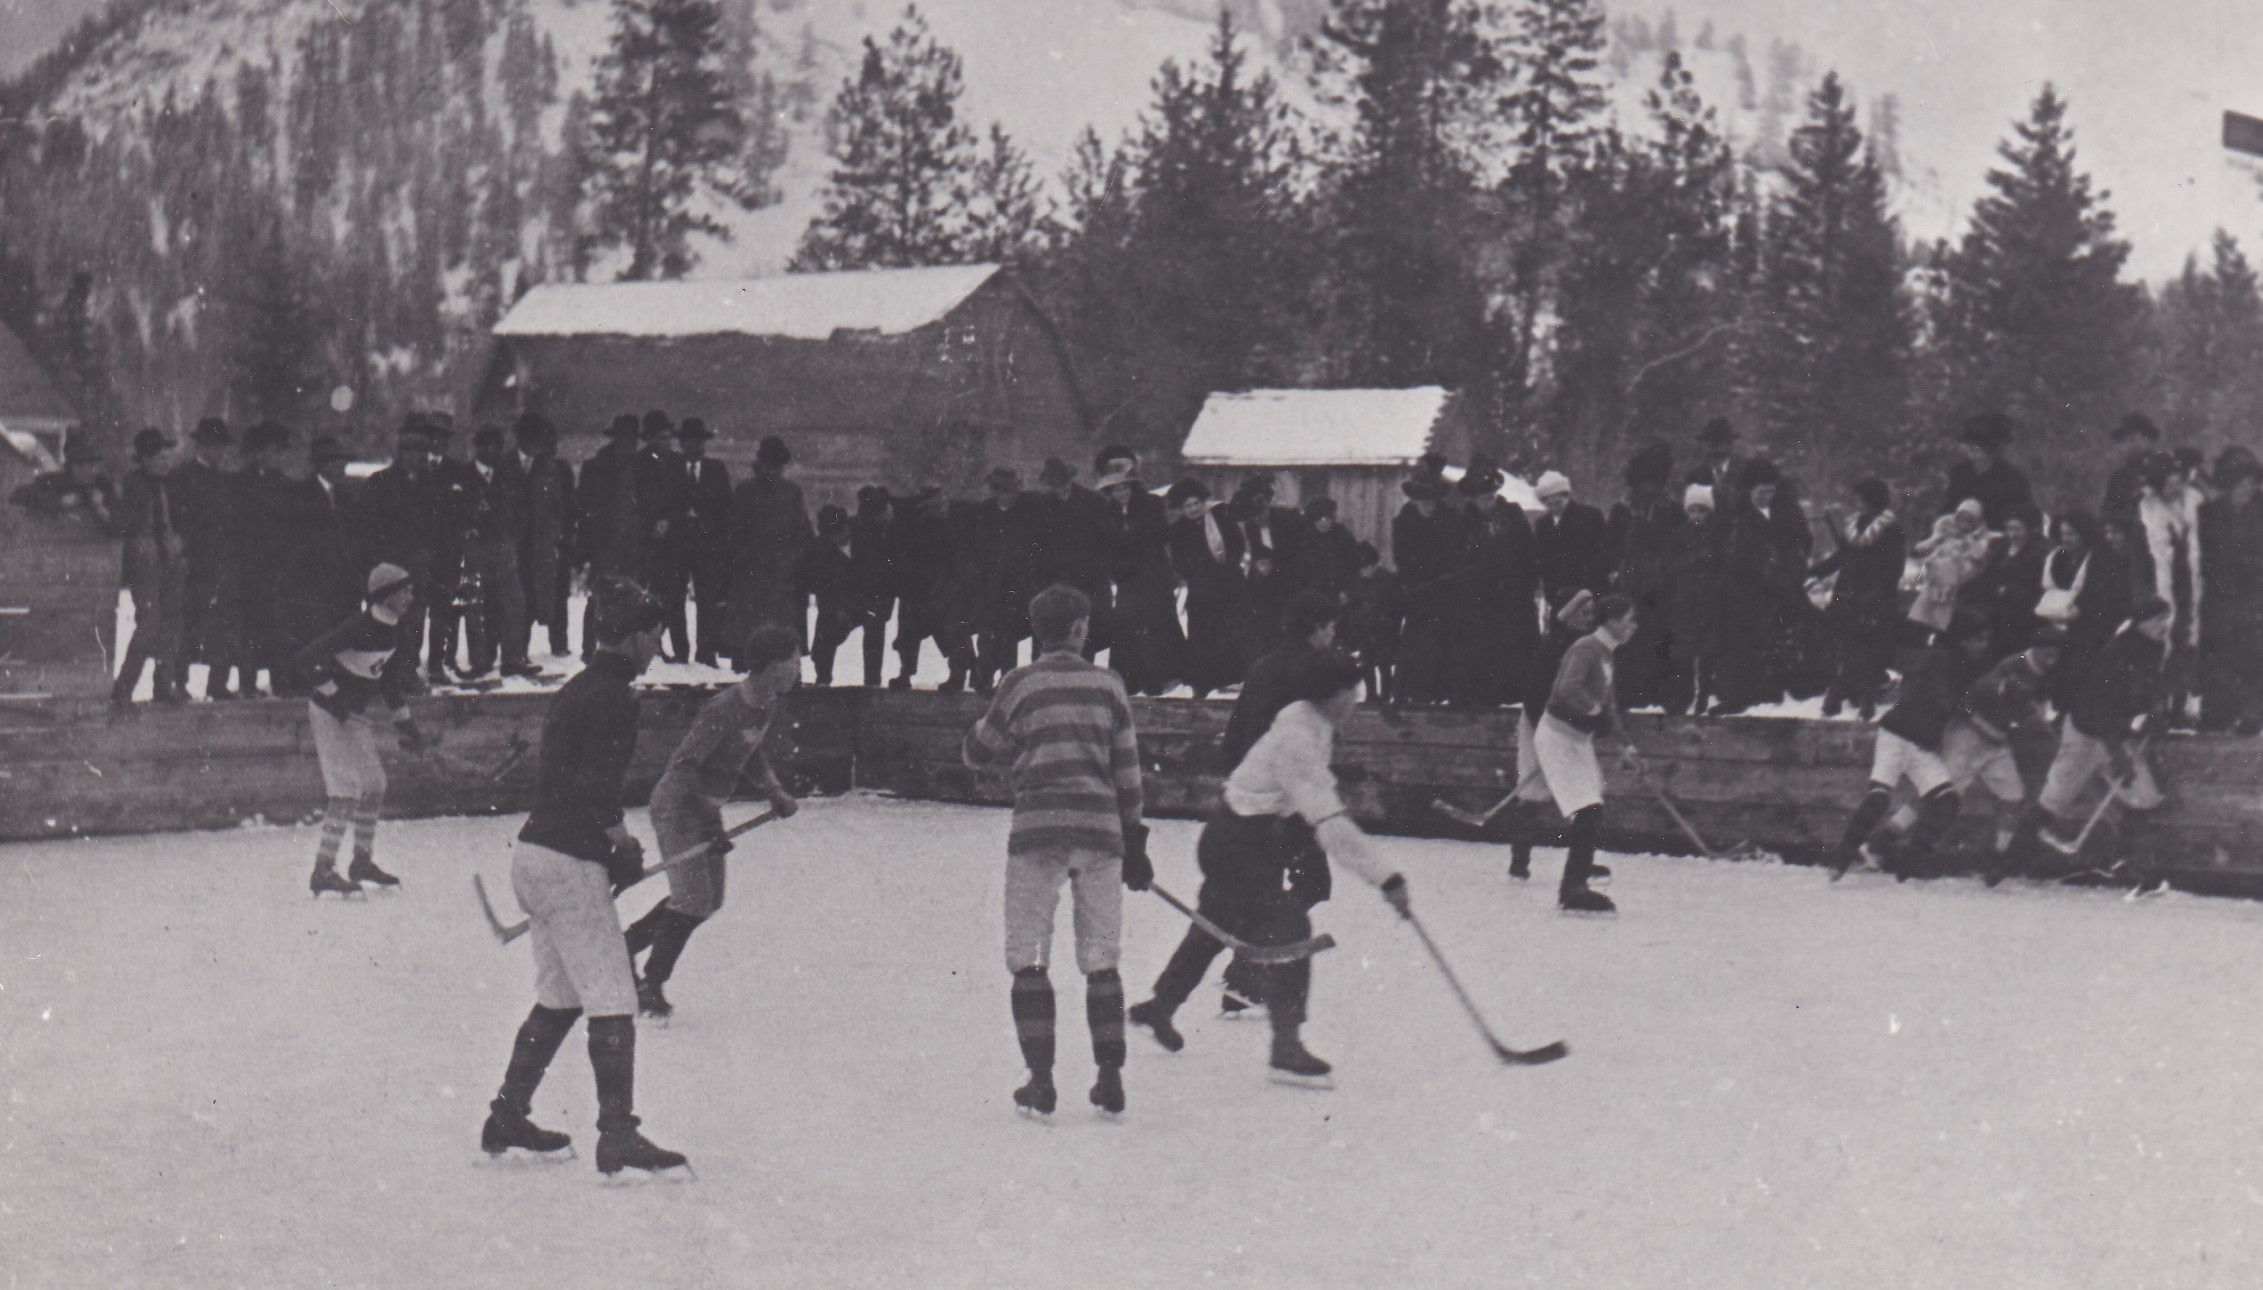 A group of young pioneer boys are playing hockey in an outdoor ice rink. All are dressed differently. None are wearing helmets or any protective gear. A large crowd is watching the game.